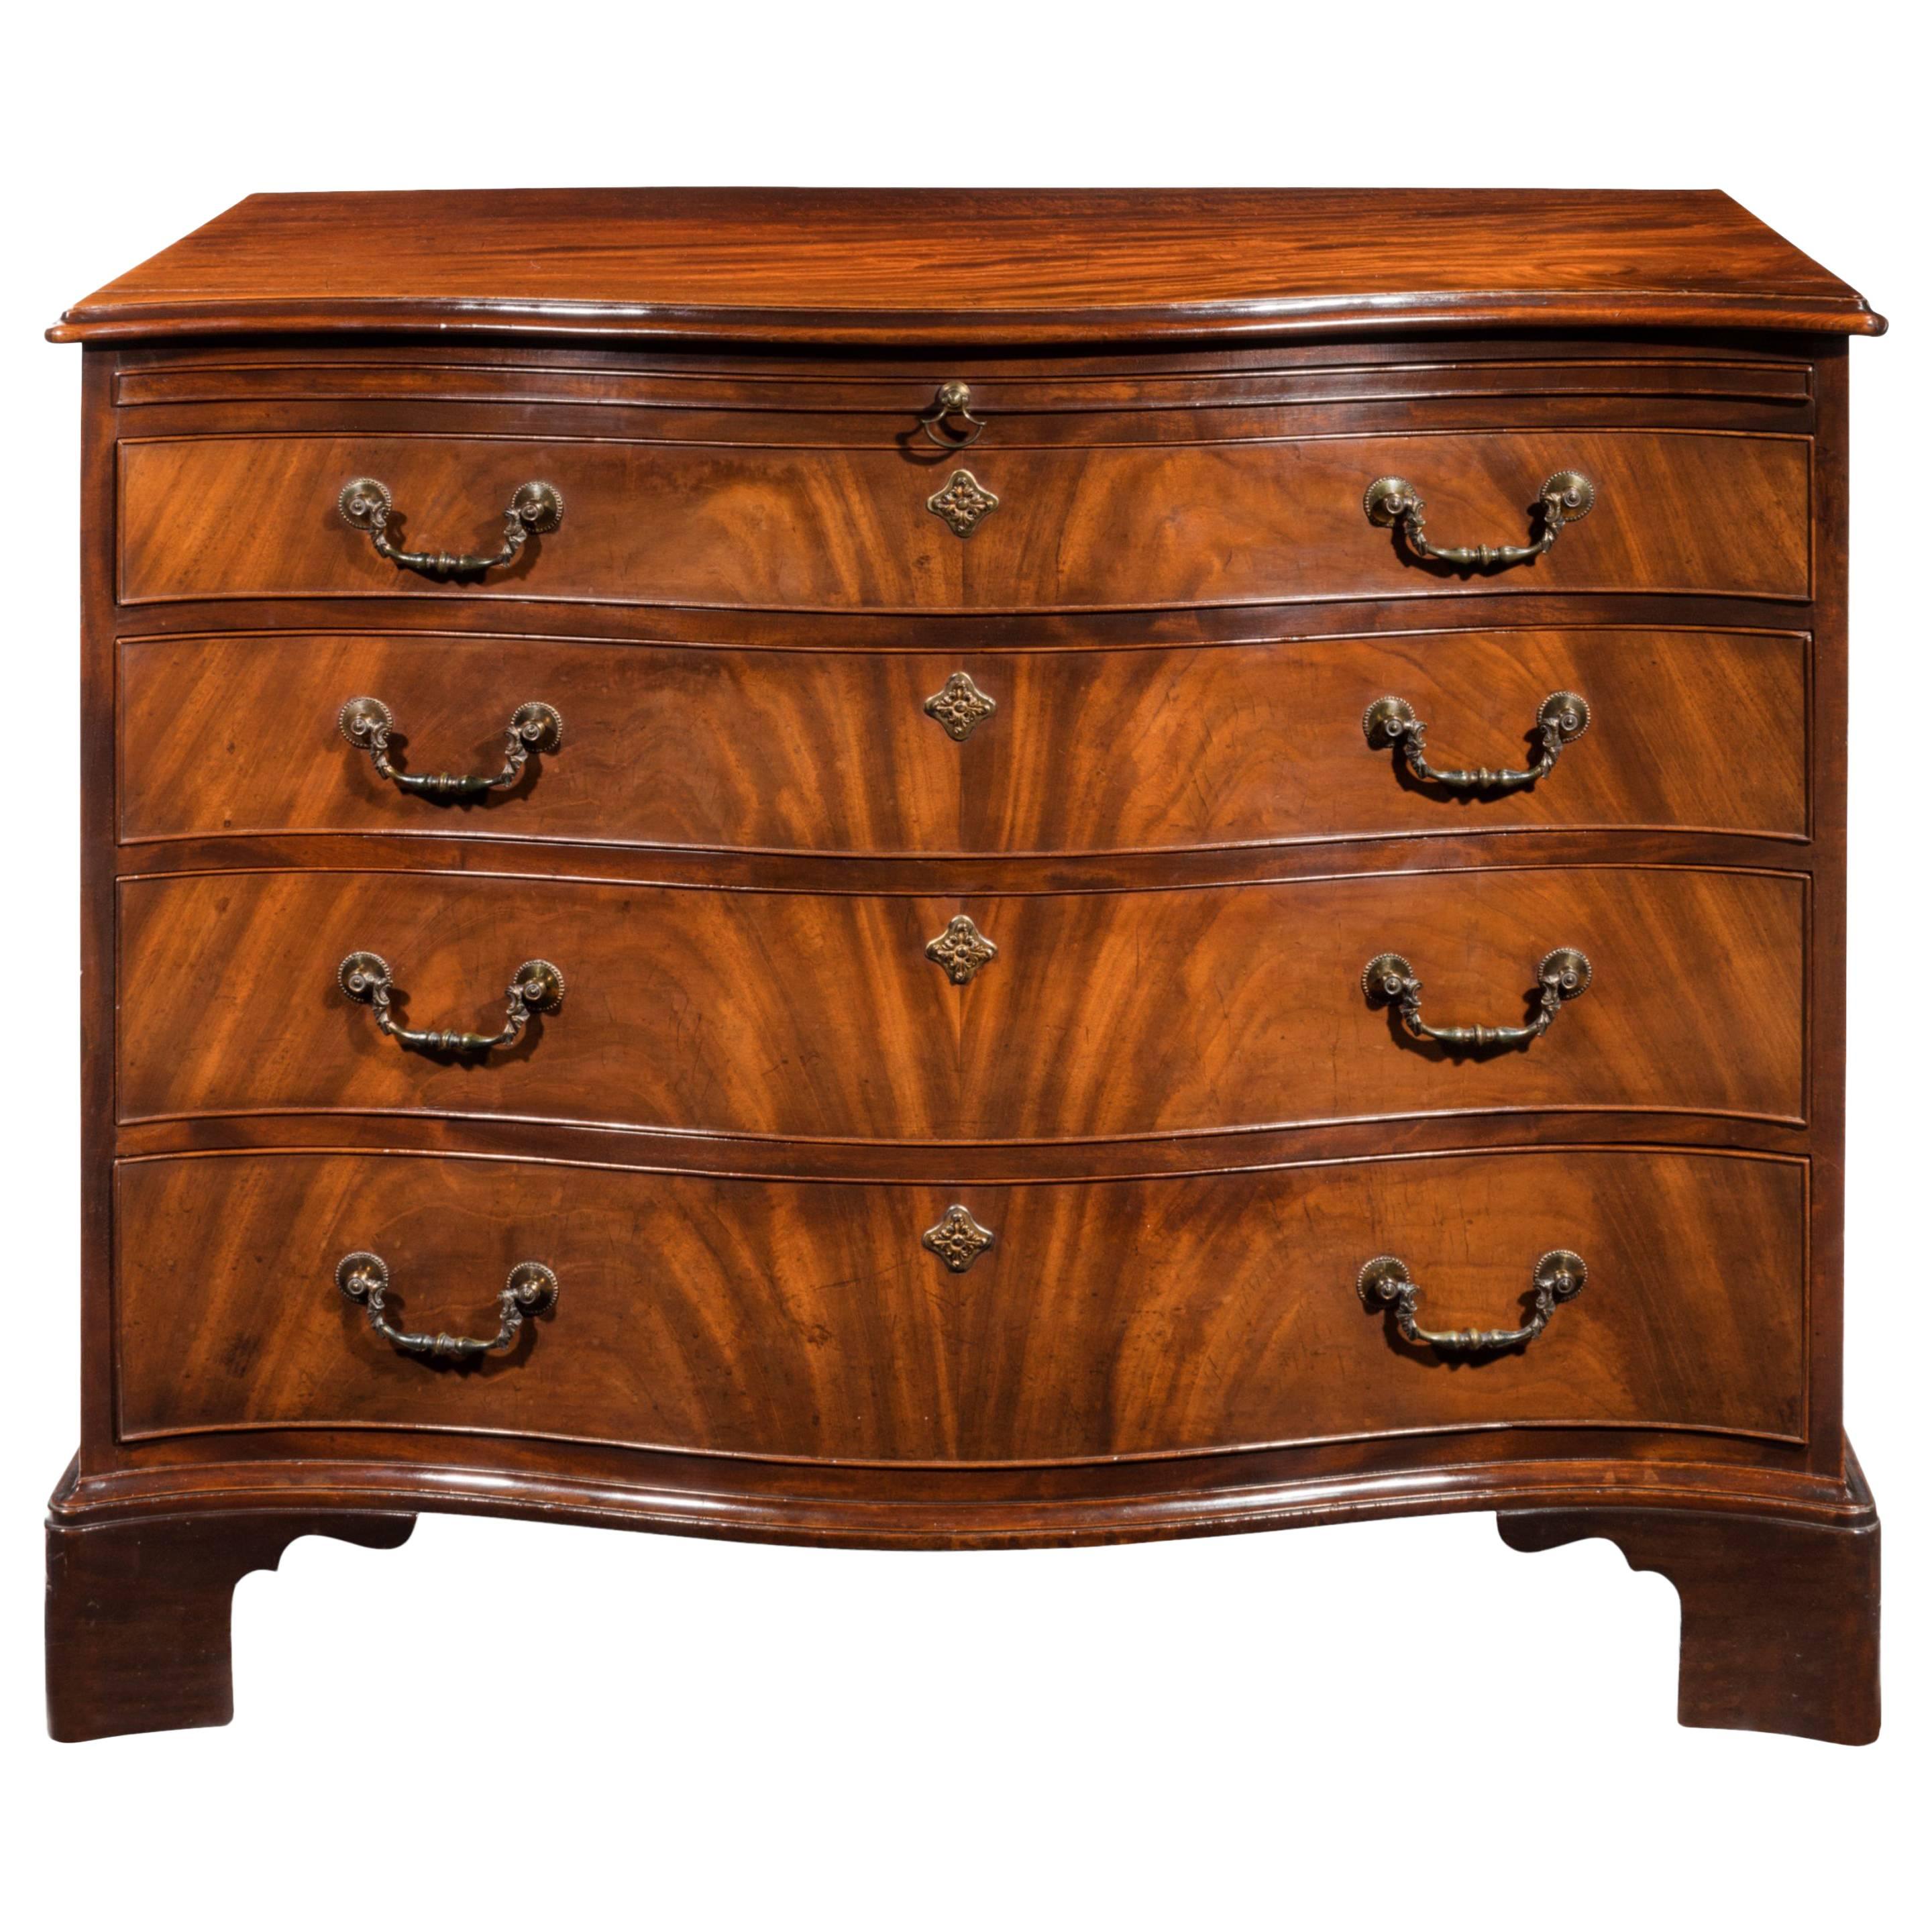 Chippendale Period Mahogany Serpentine Commode Chest For Sale